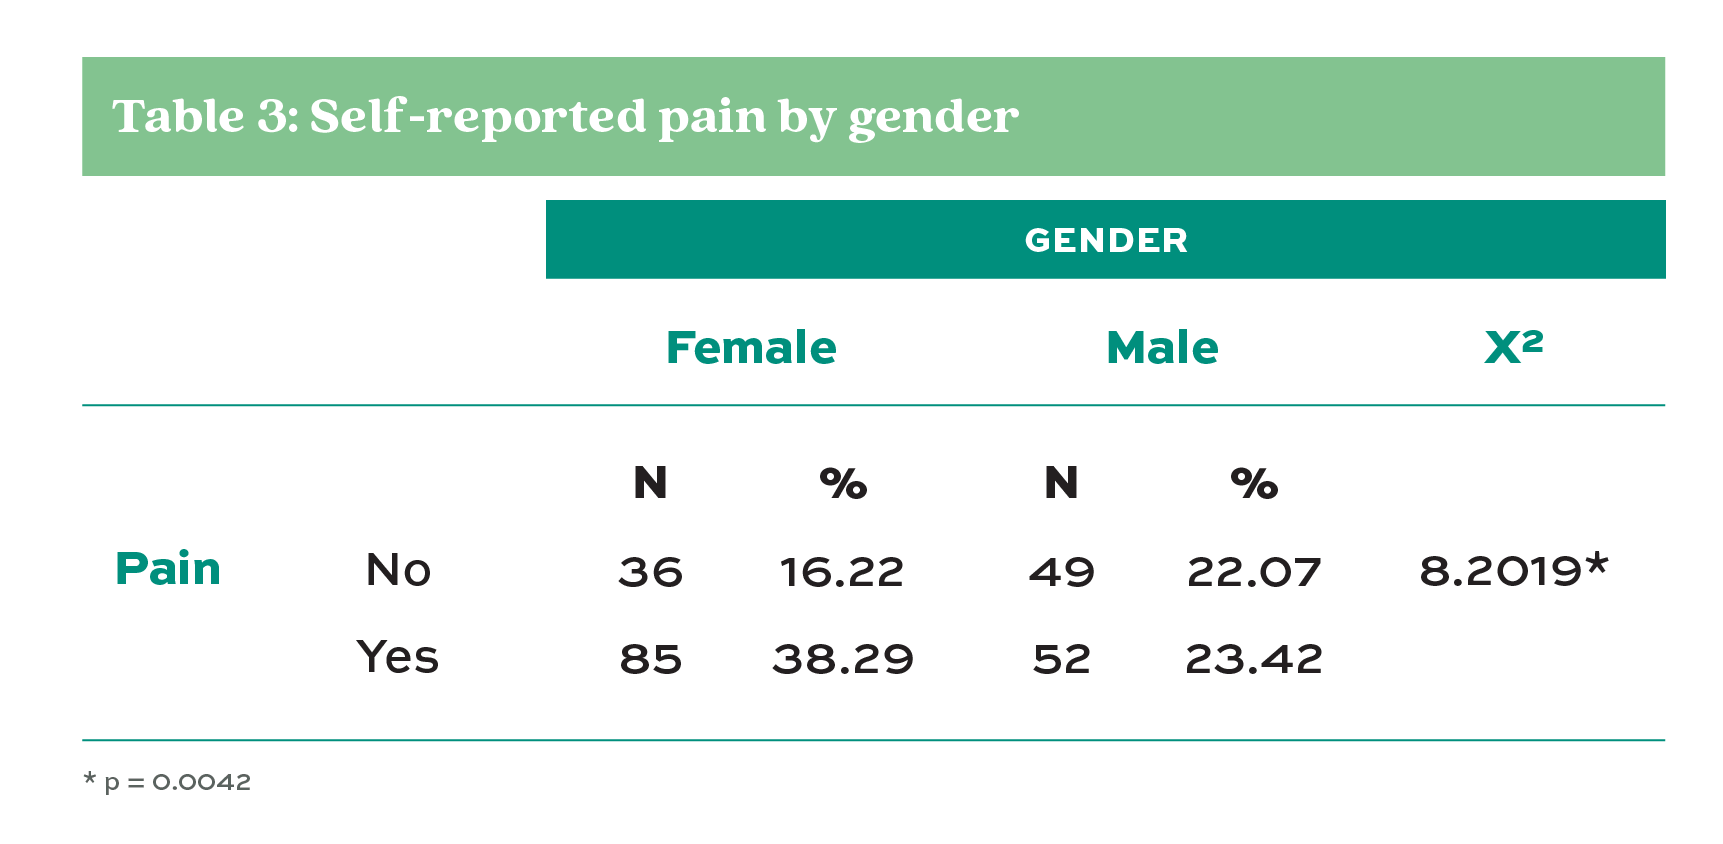 Table 3. Self-reported pain by gender